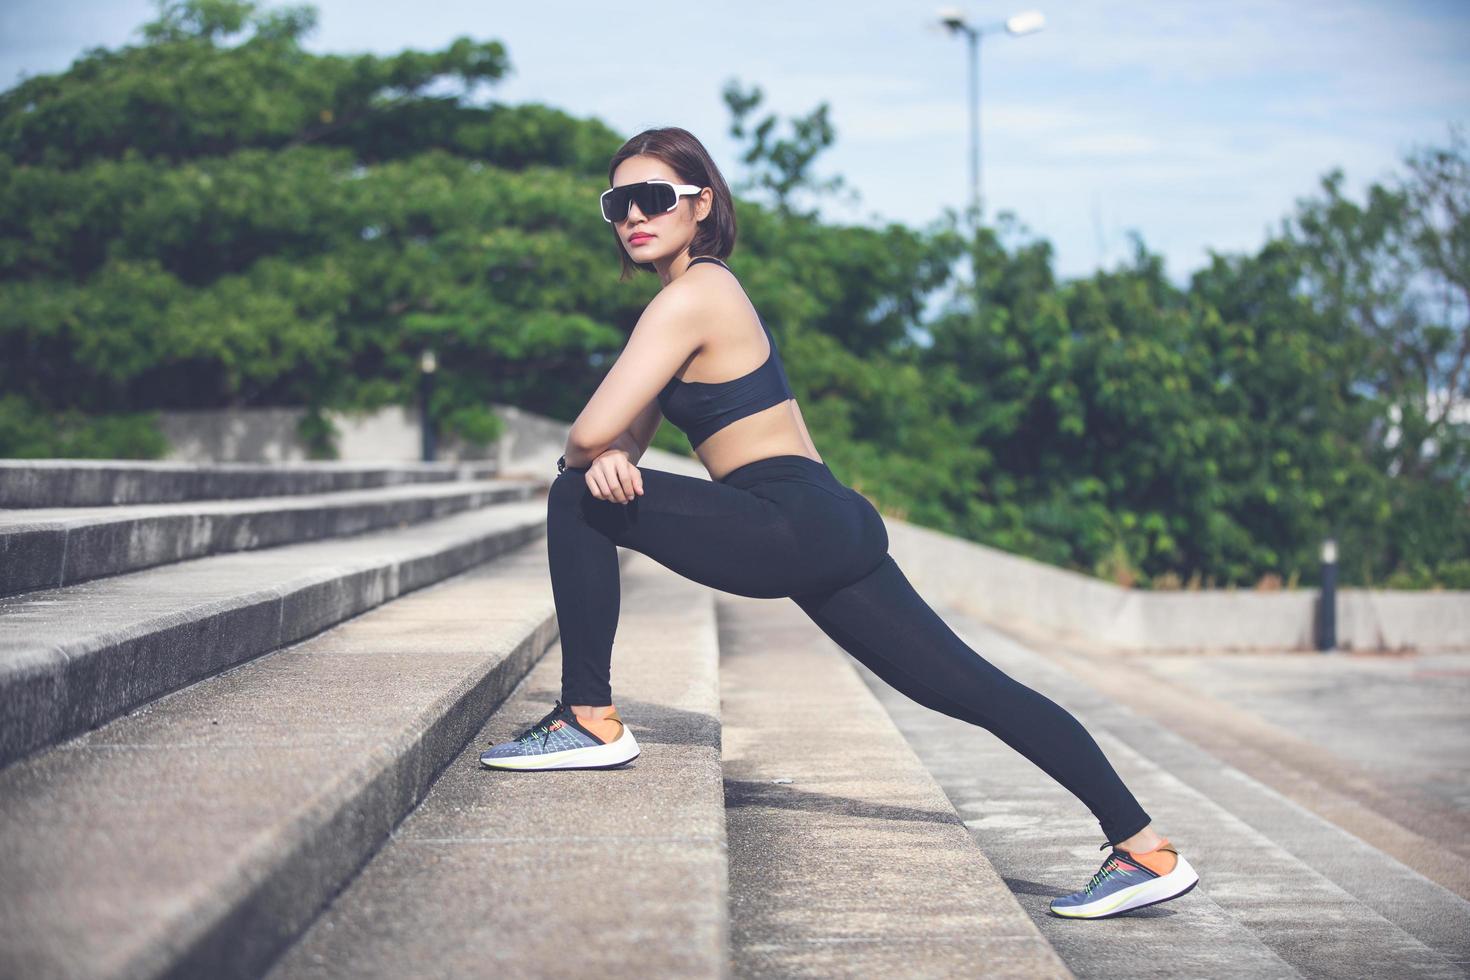 Athletic woman asian  warming up and Young female athlete sitting on an exercising and stretching in a park before Runner outdoors, healthy lifestyle concept photo